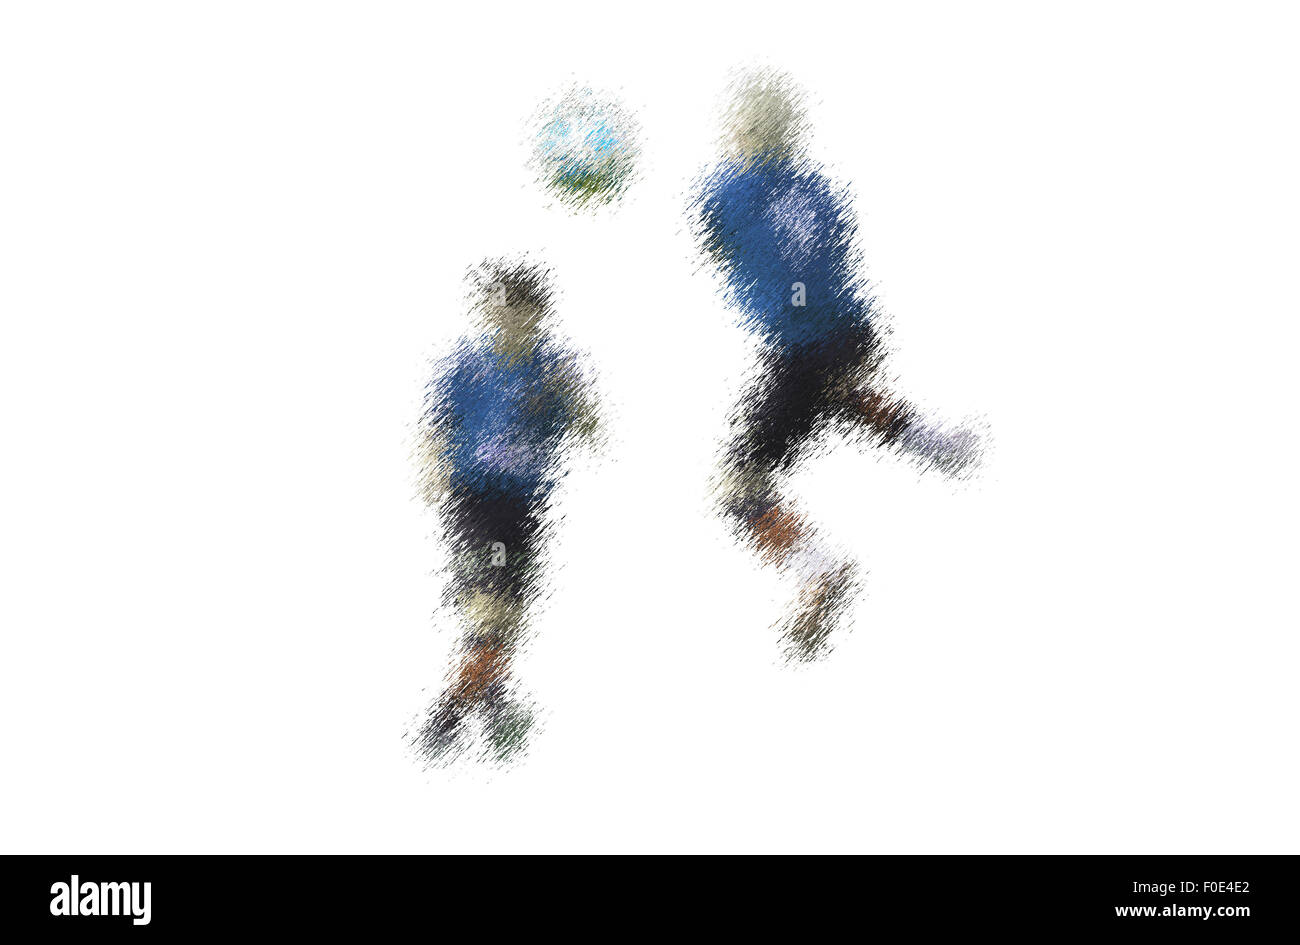 Blue player jumps. Abstract digital illustration of soccer football players, teenagers around 15 years old, in action isolated o Stock Photo